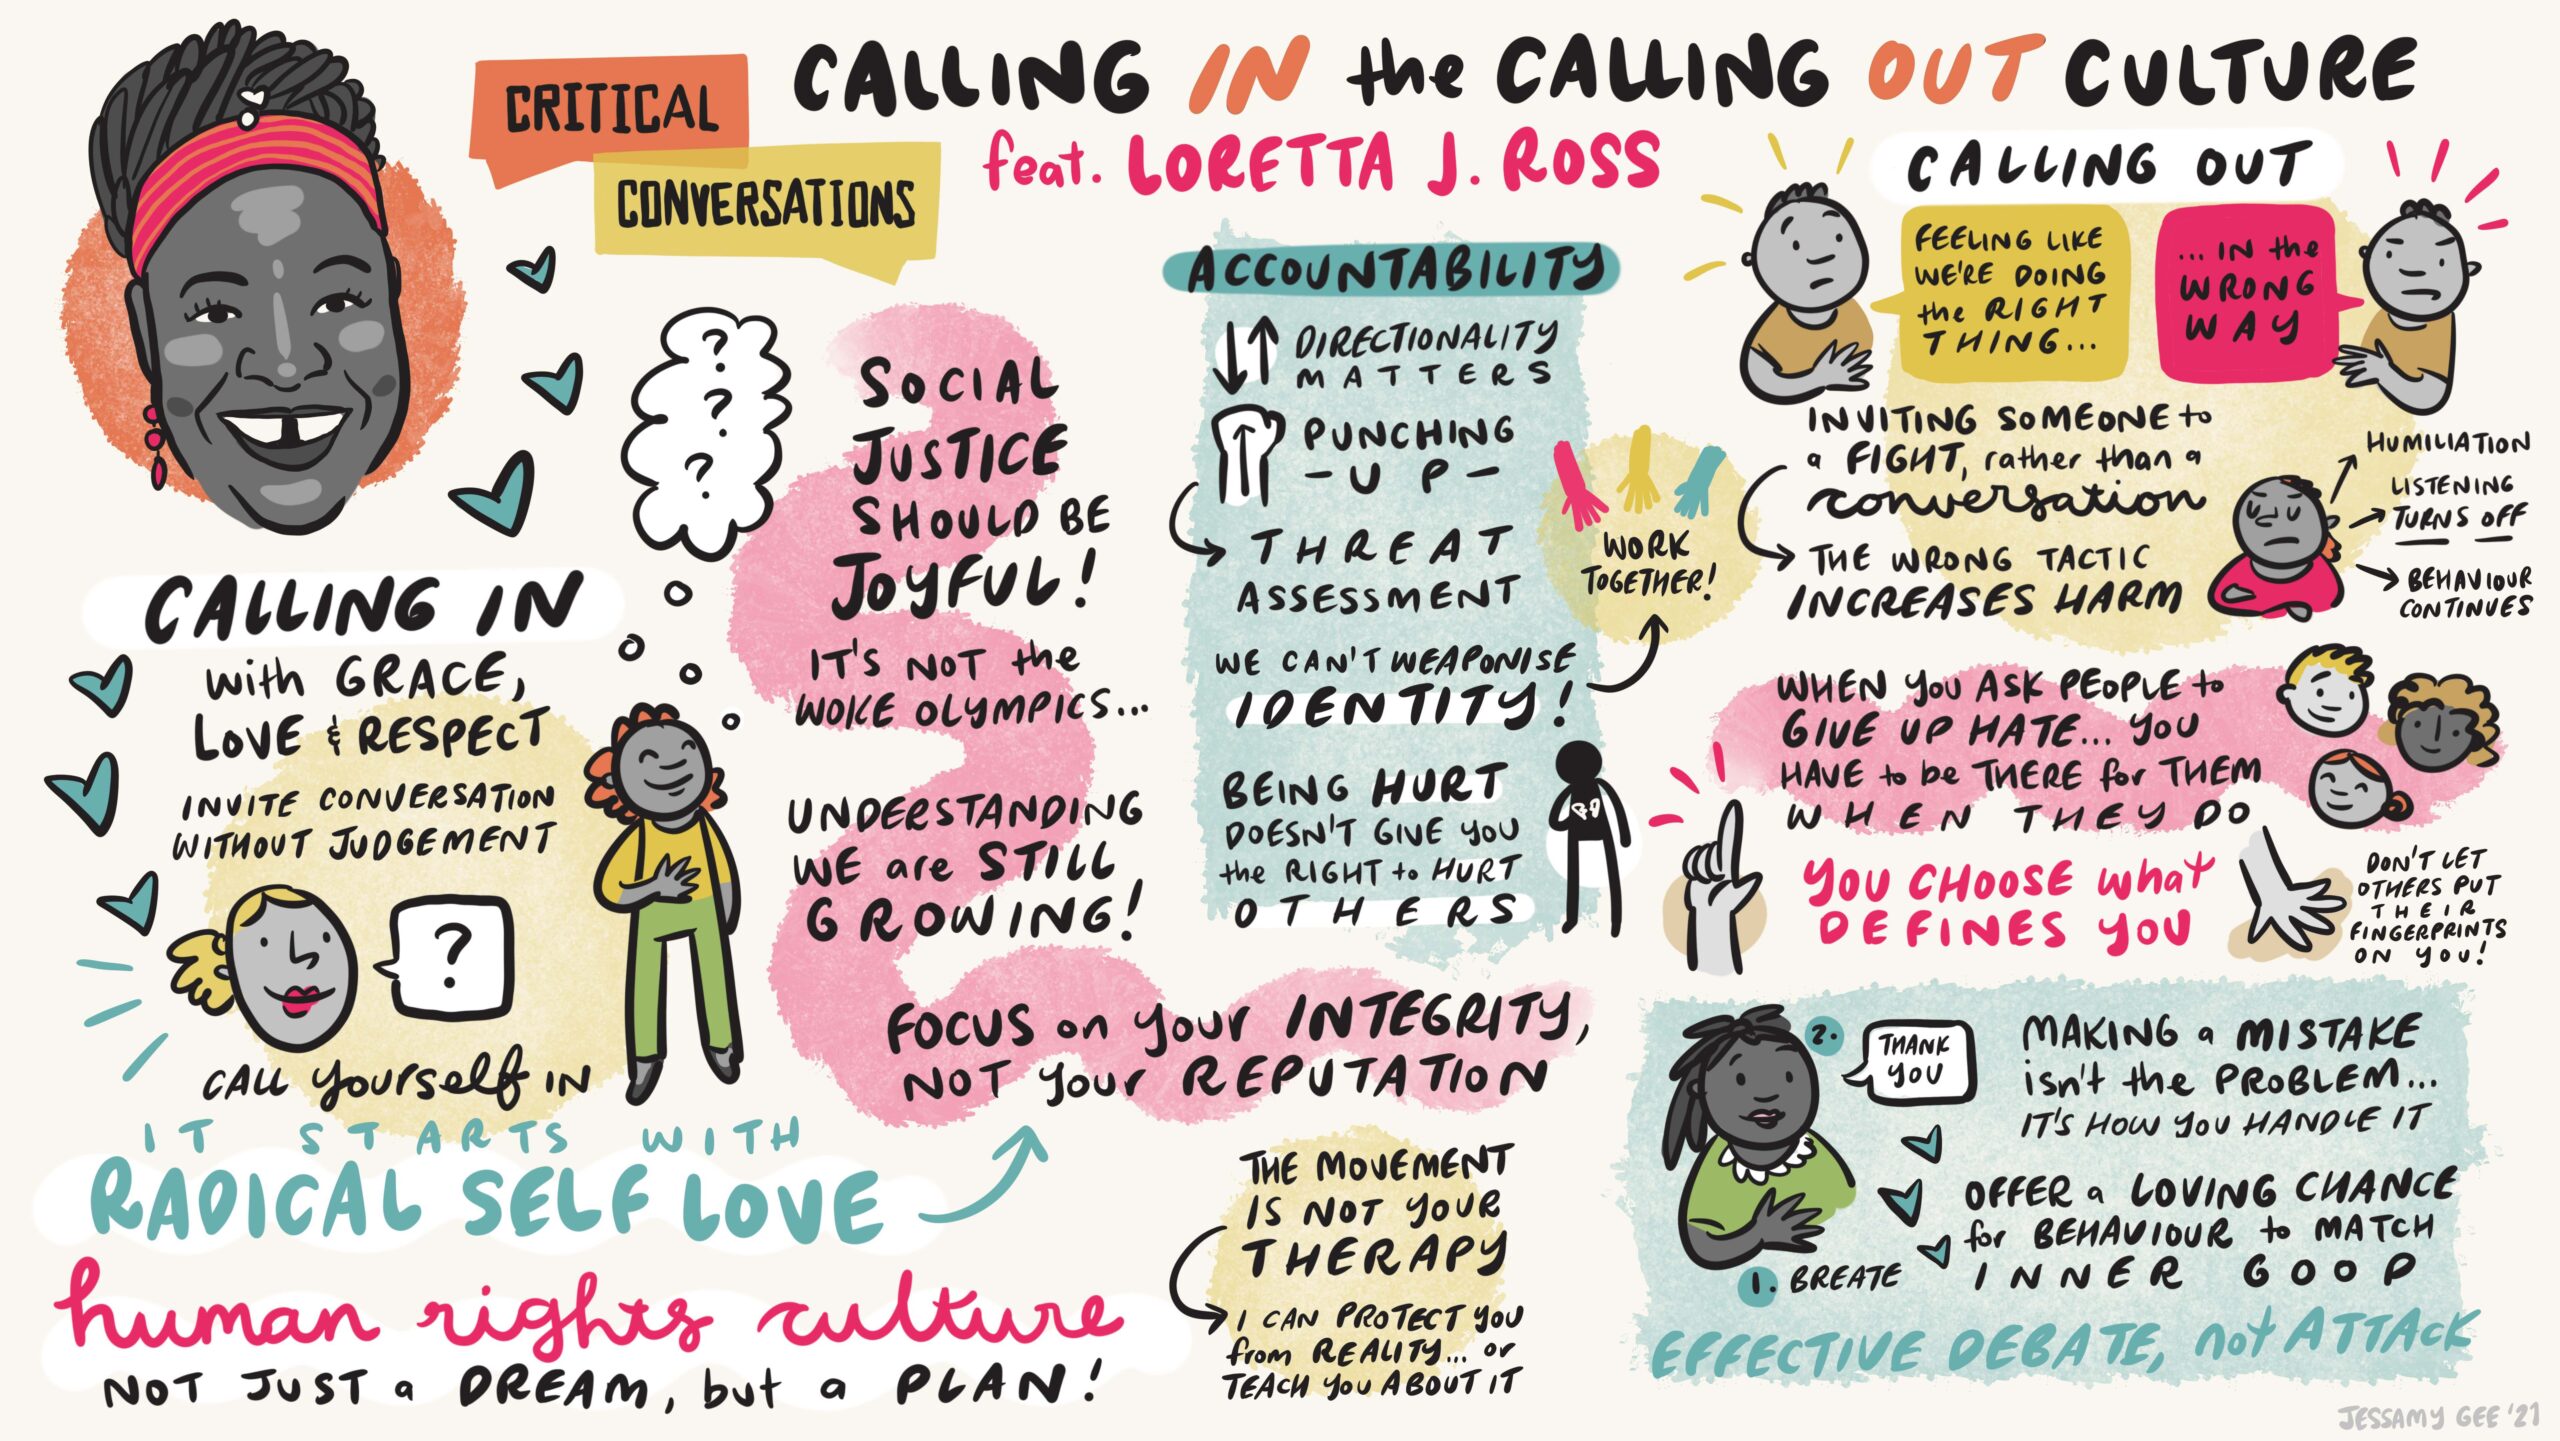 A graphic depicting art work based on Loretta Ross's Critcal Conversations talk.